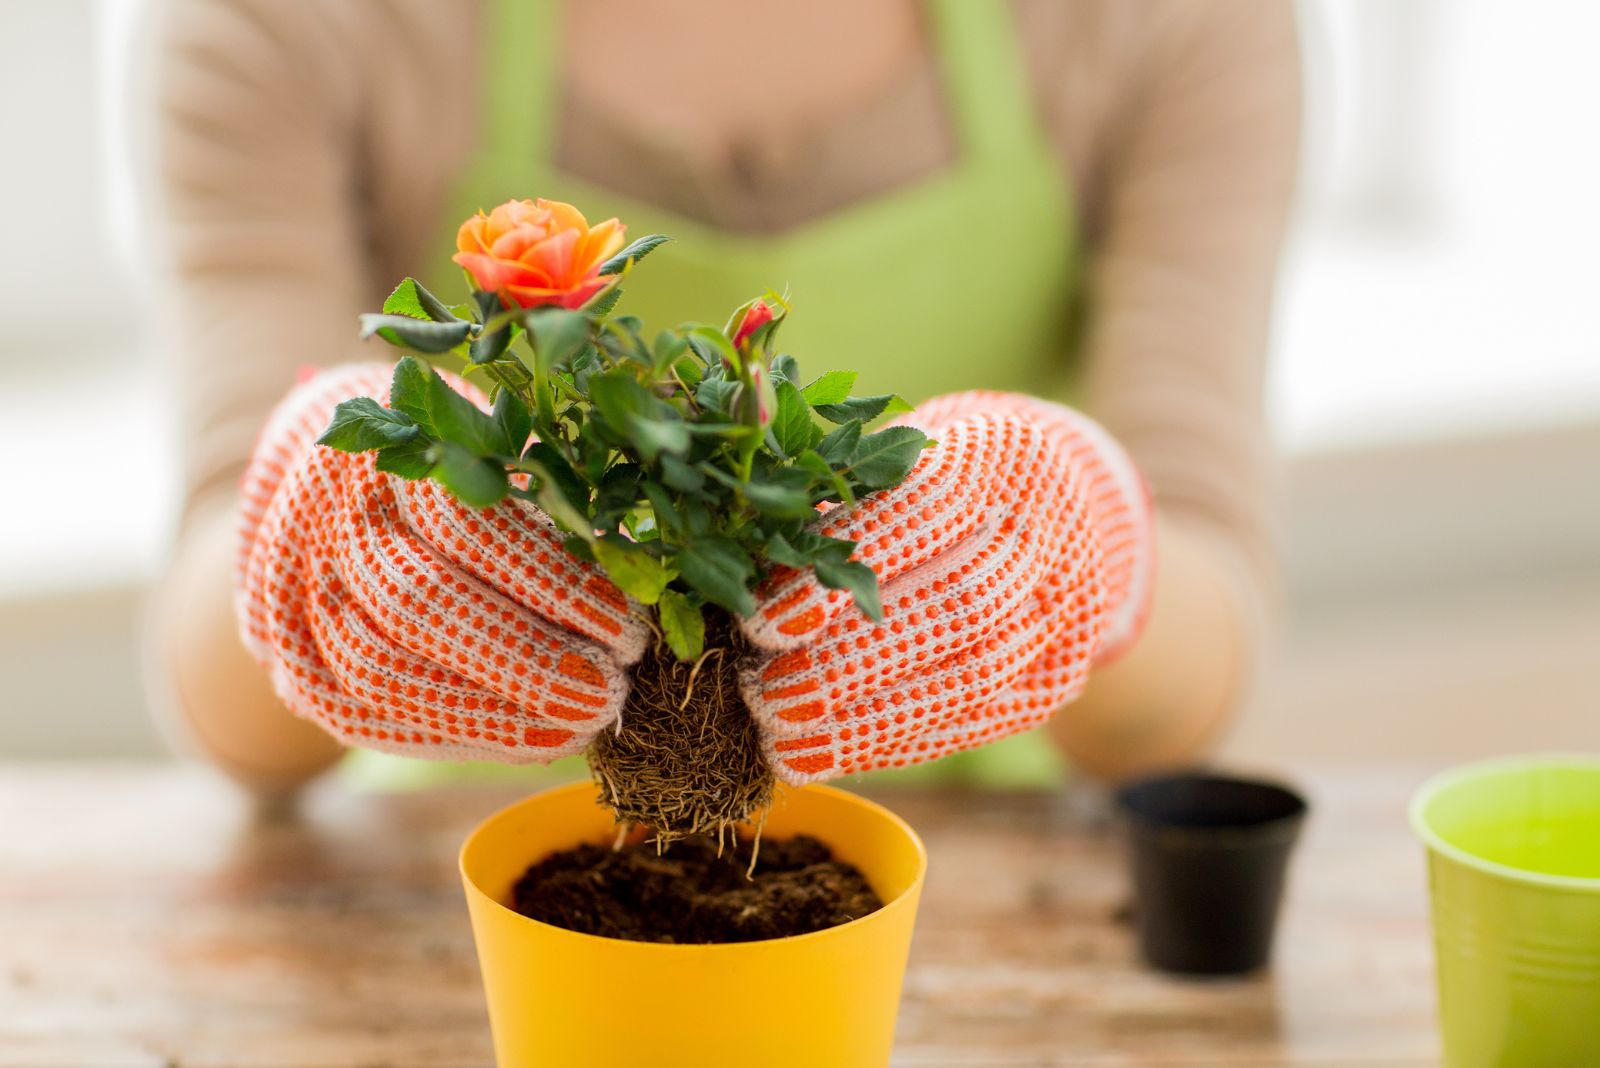 a woman plants a rose in a pot